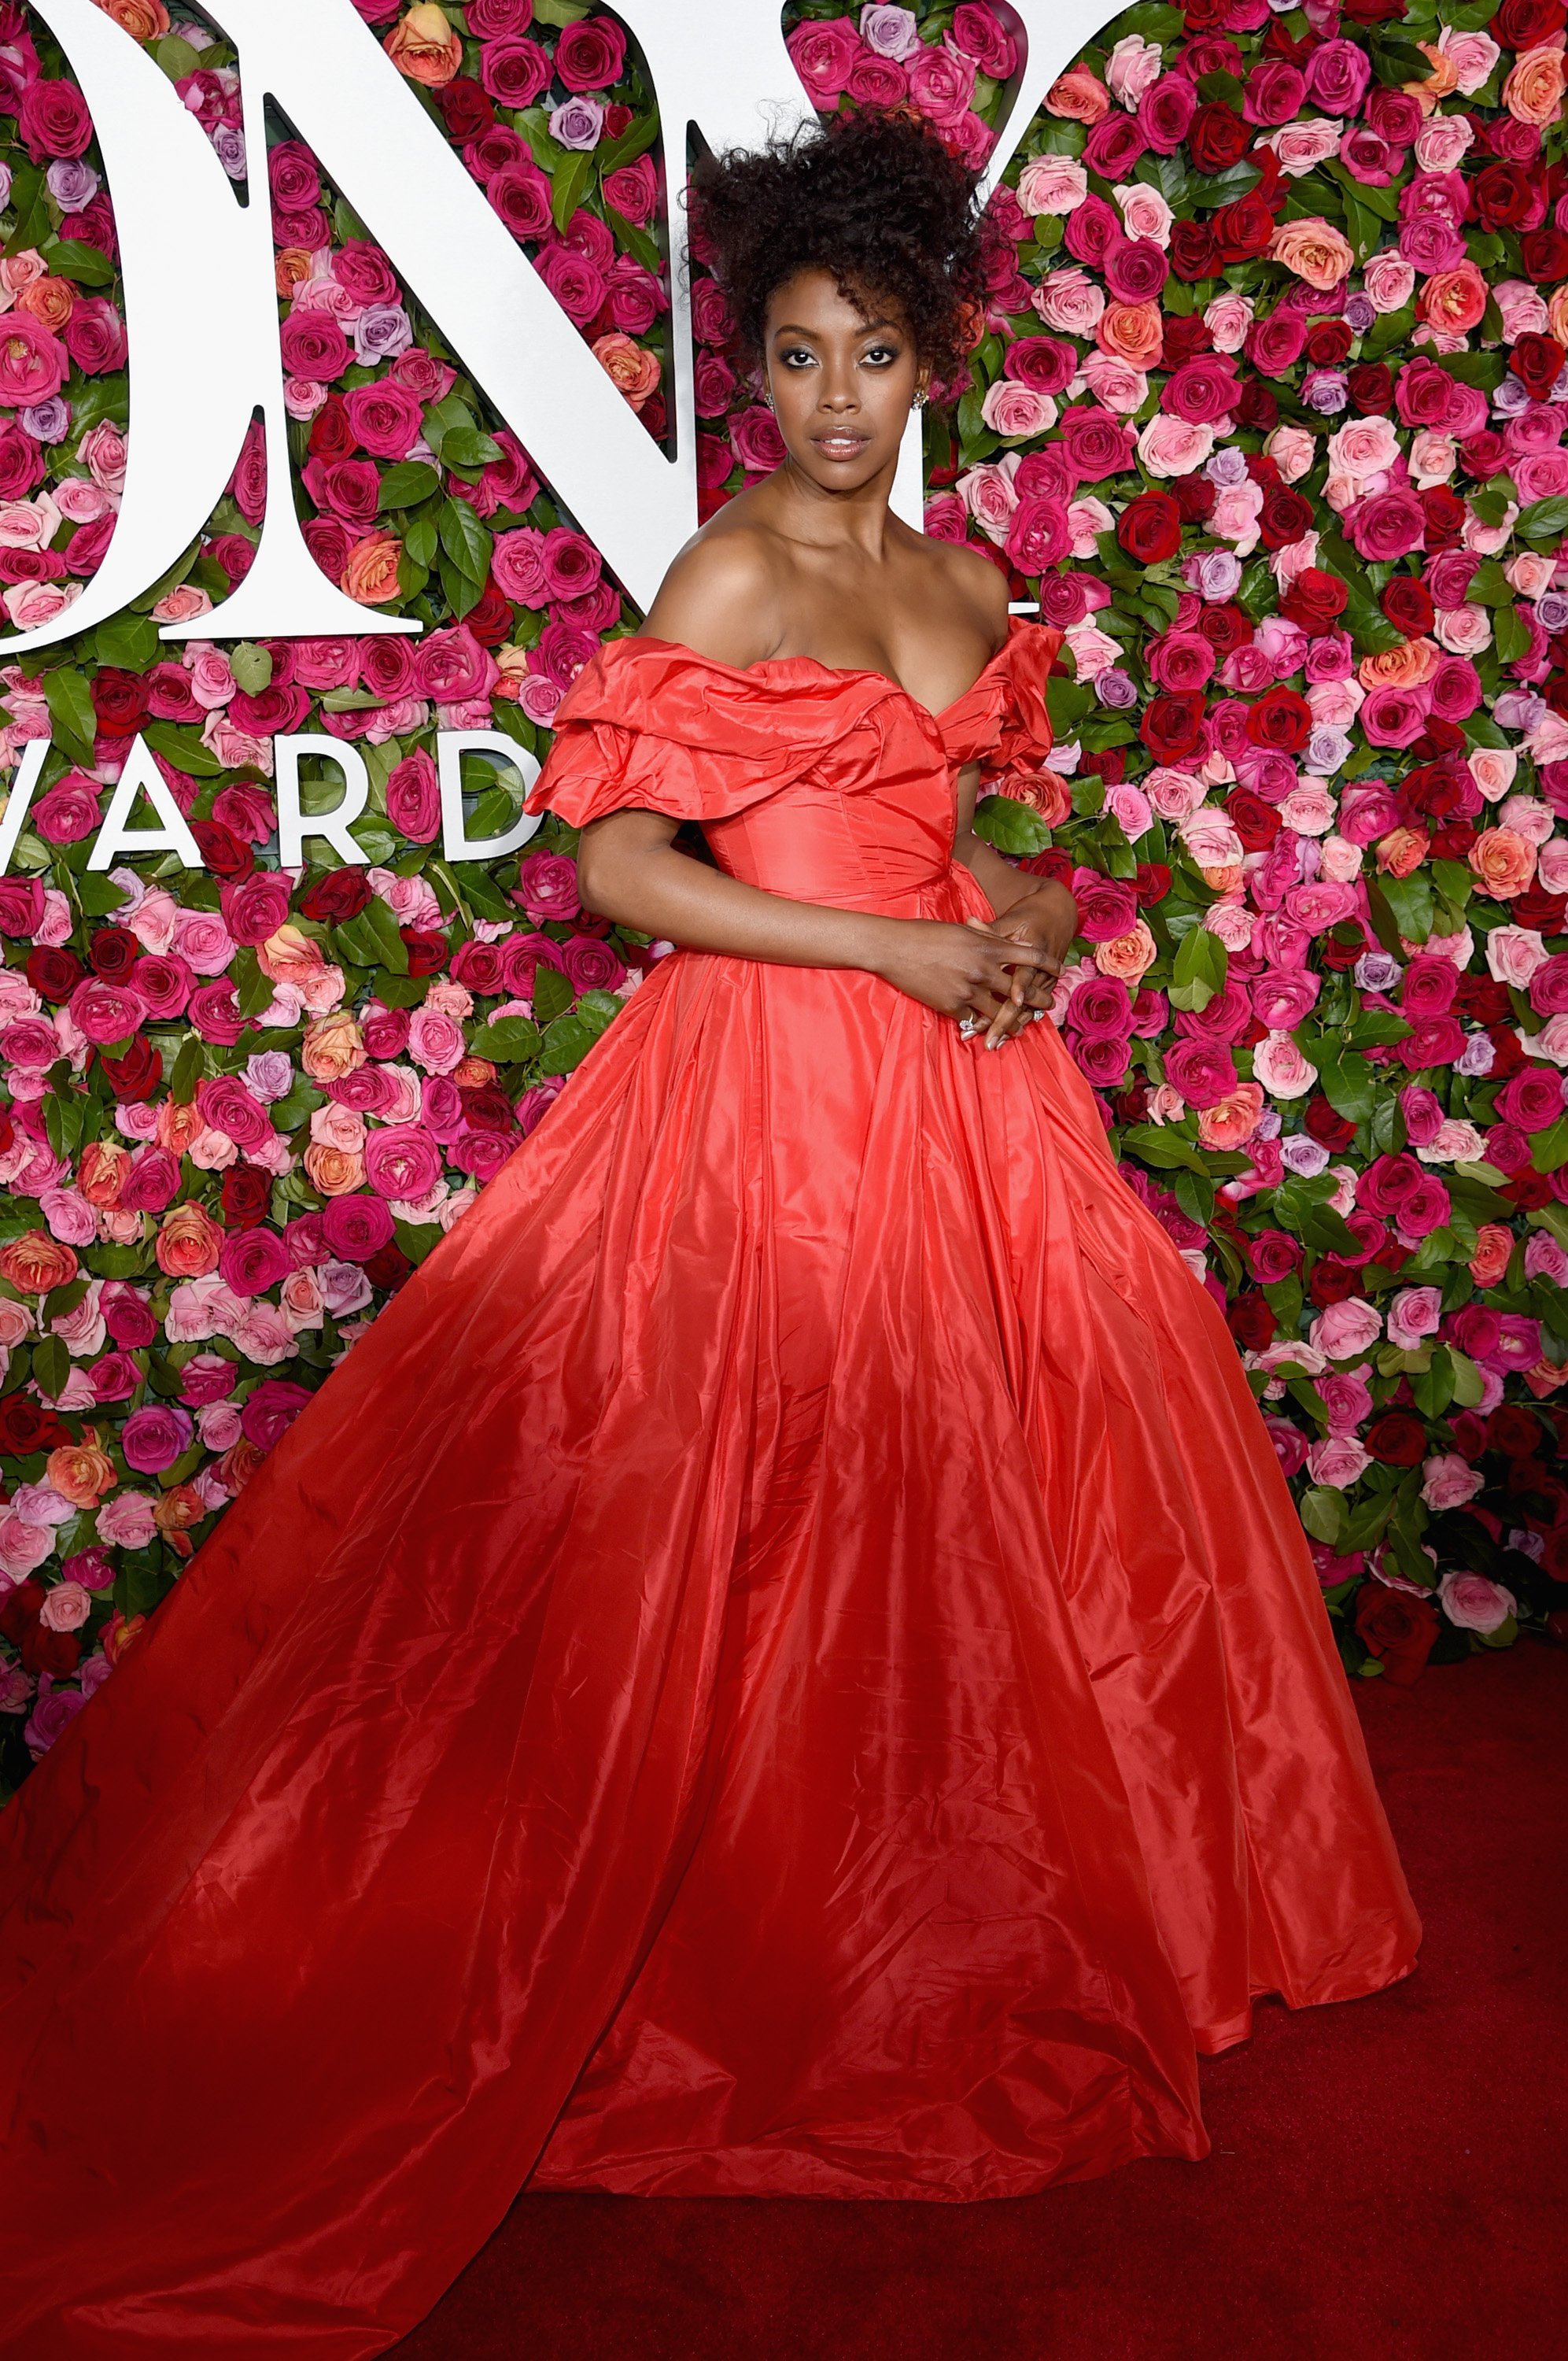 Condola Rashad attends the 72nd Annual Tony Awards at Radio City Music Hall on June 10, 2018 in New York City | Photo: GettyImages